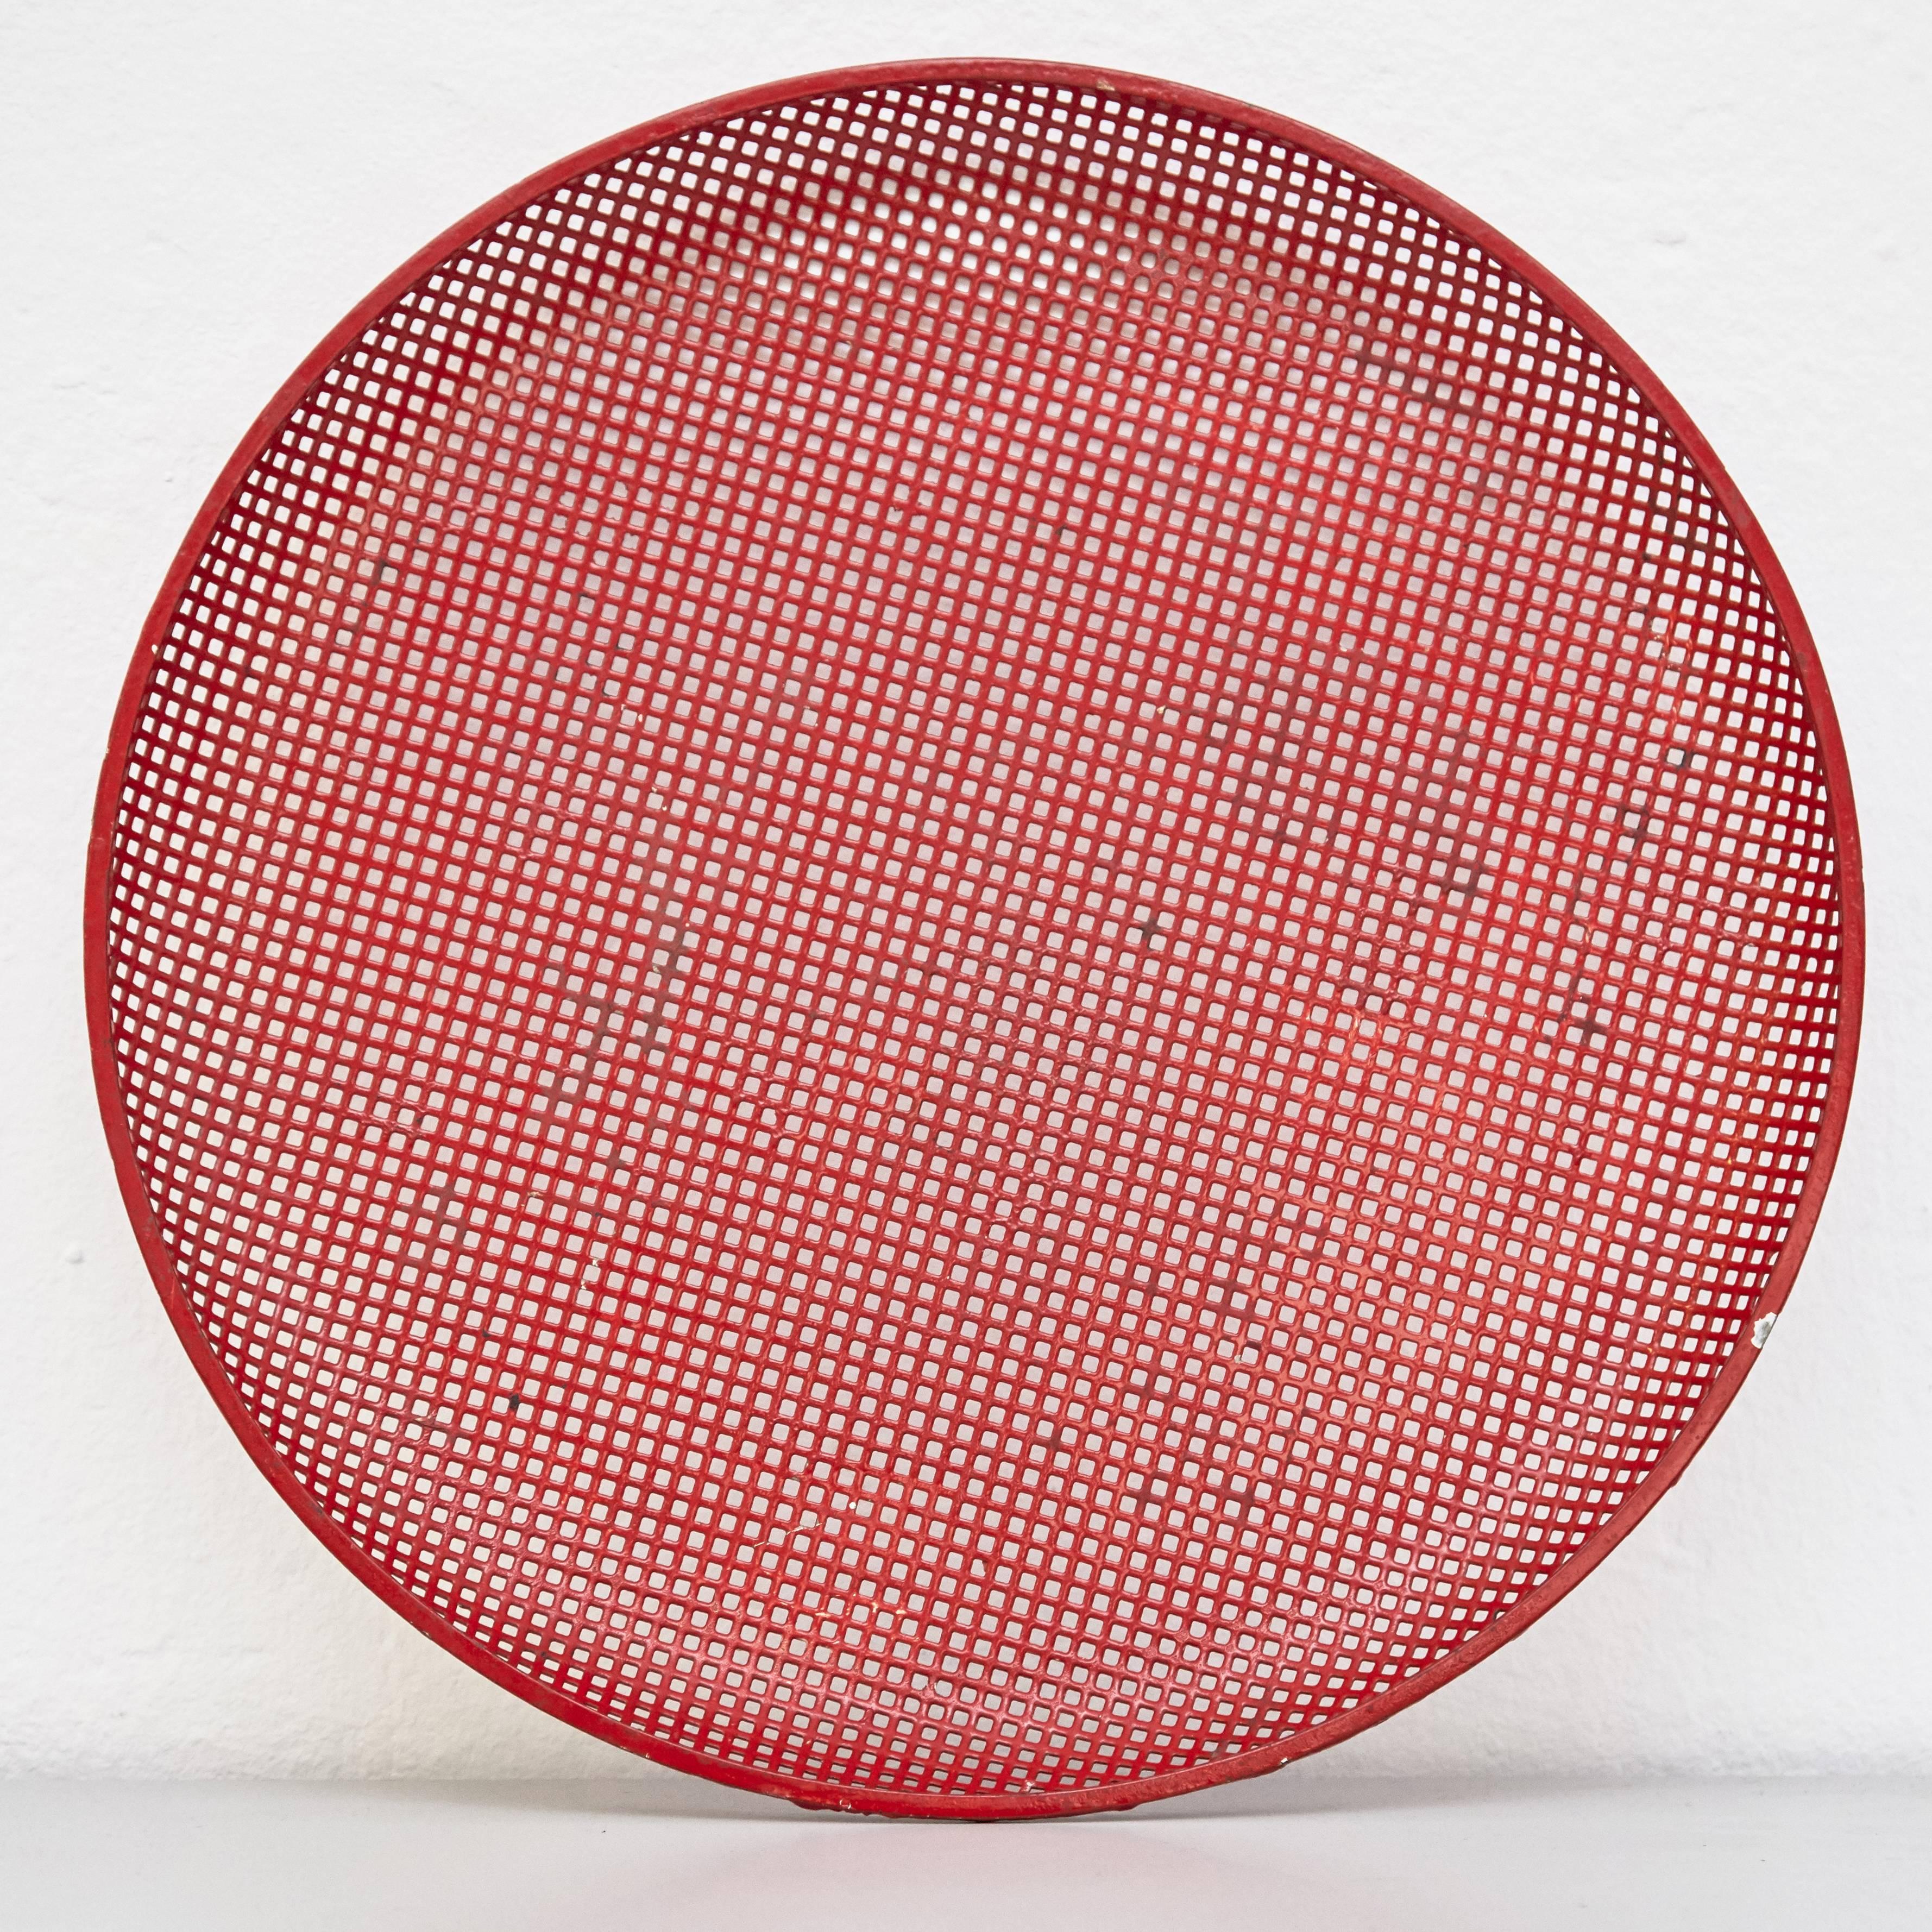 Enameled metal plate designed by Mathieu Mategot.
Manufactured by Artimeta (Holland), circa 1950.
Lacquered perforated metal, seem to be repainted many years ago.

In good original condition, with minor wear consistent with age and use,